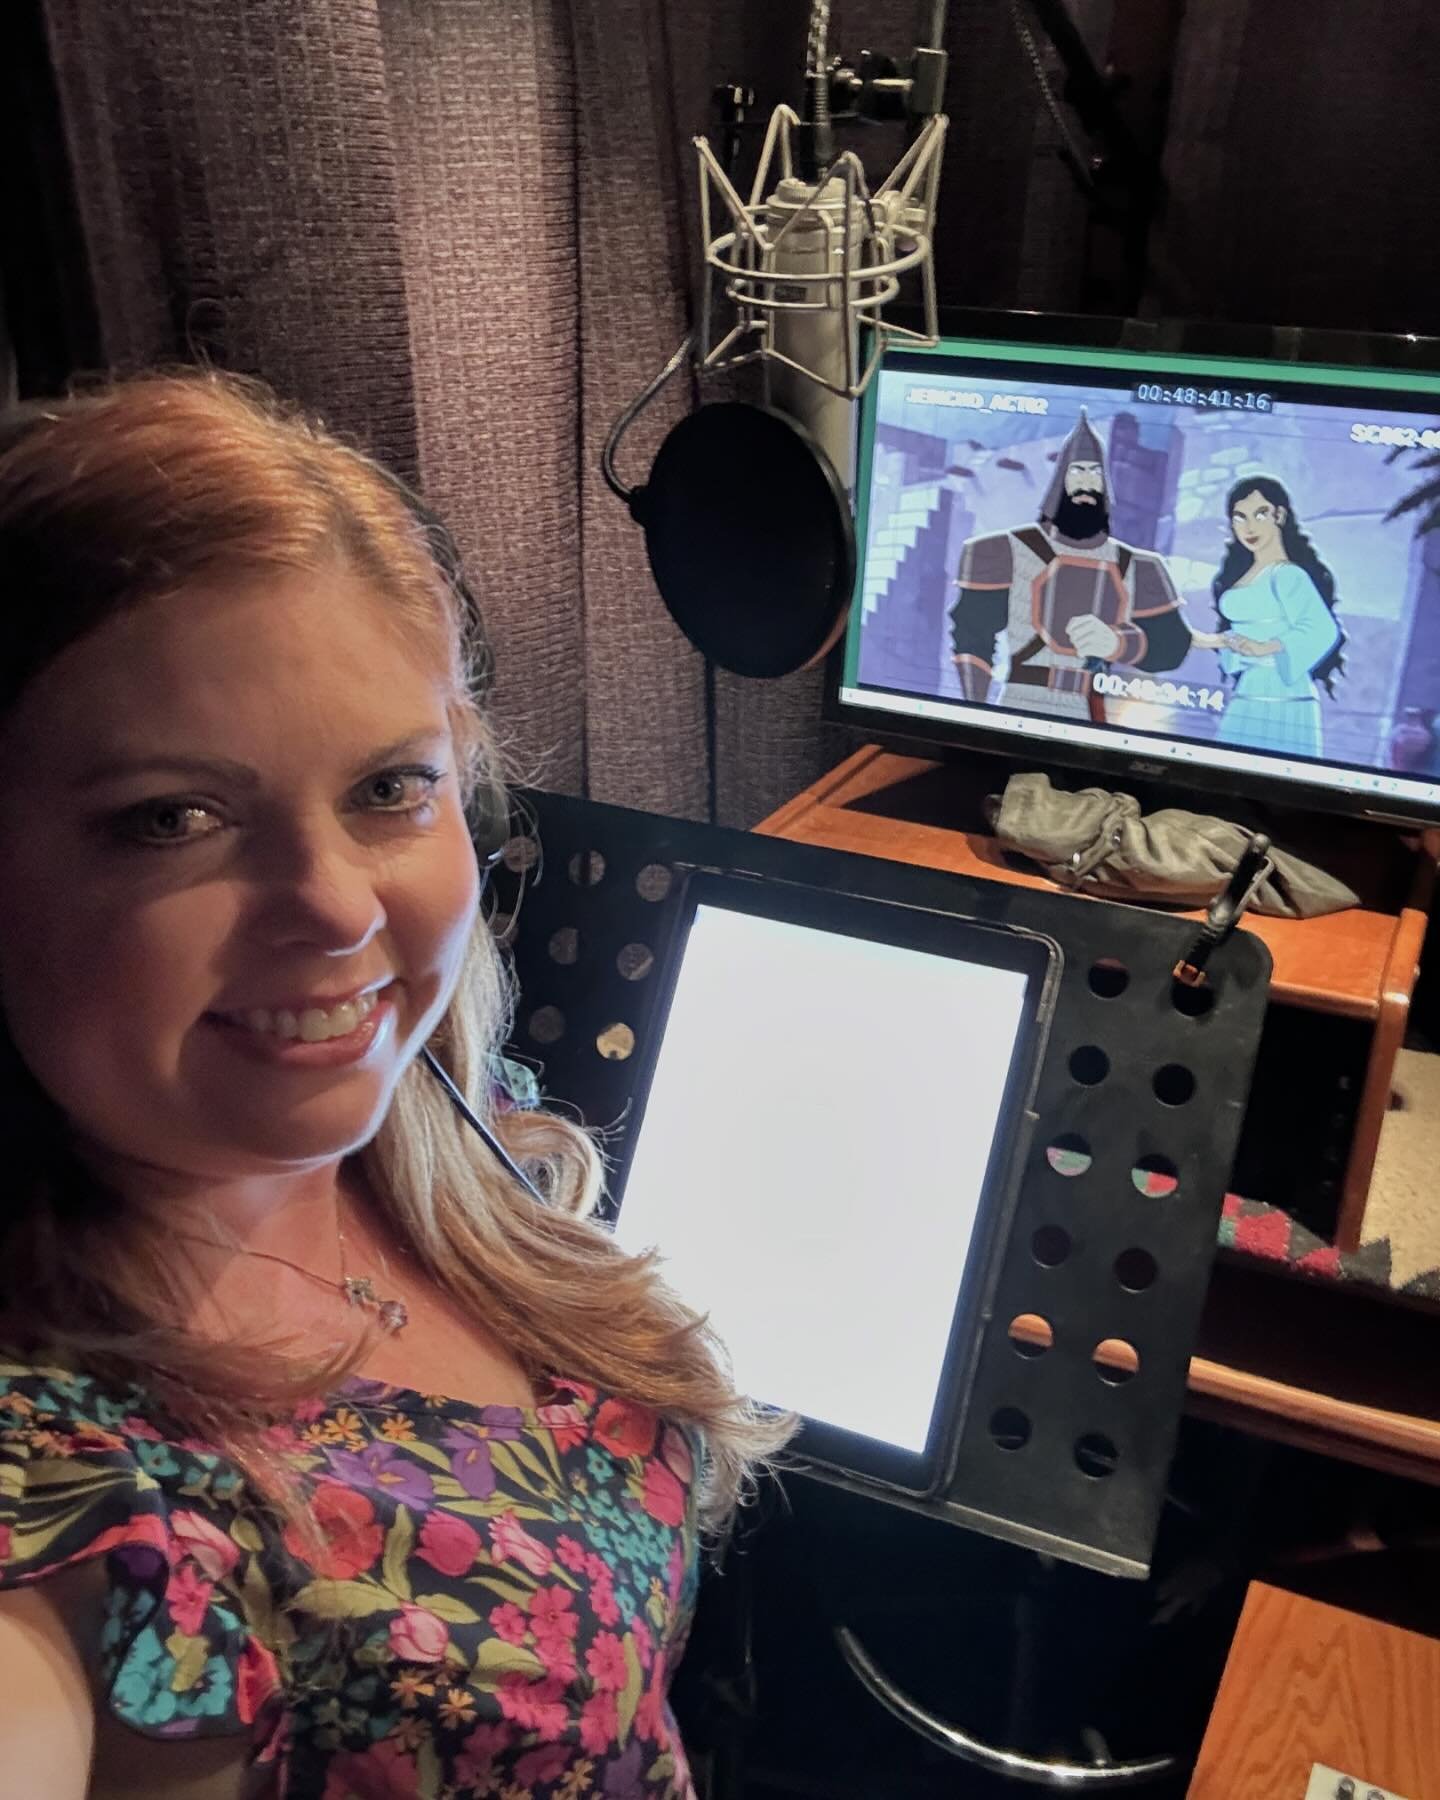 Had a super fun in studio session this morning working on an animated feature film! Can&rsquo;t wait to see how it turns out. 🤩 
.
.
.
#voiceovers #voiceoverartist #voiceoveractor #voiceactor #voiceoverlife #voiceoverwork #voiceoverjobs #voiceoverca